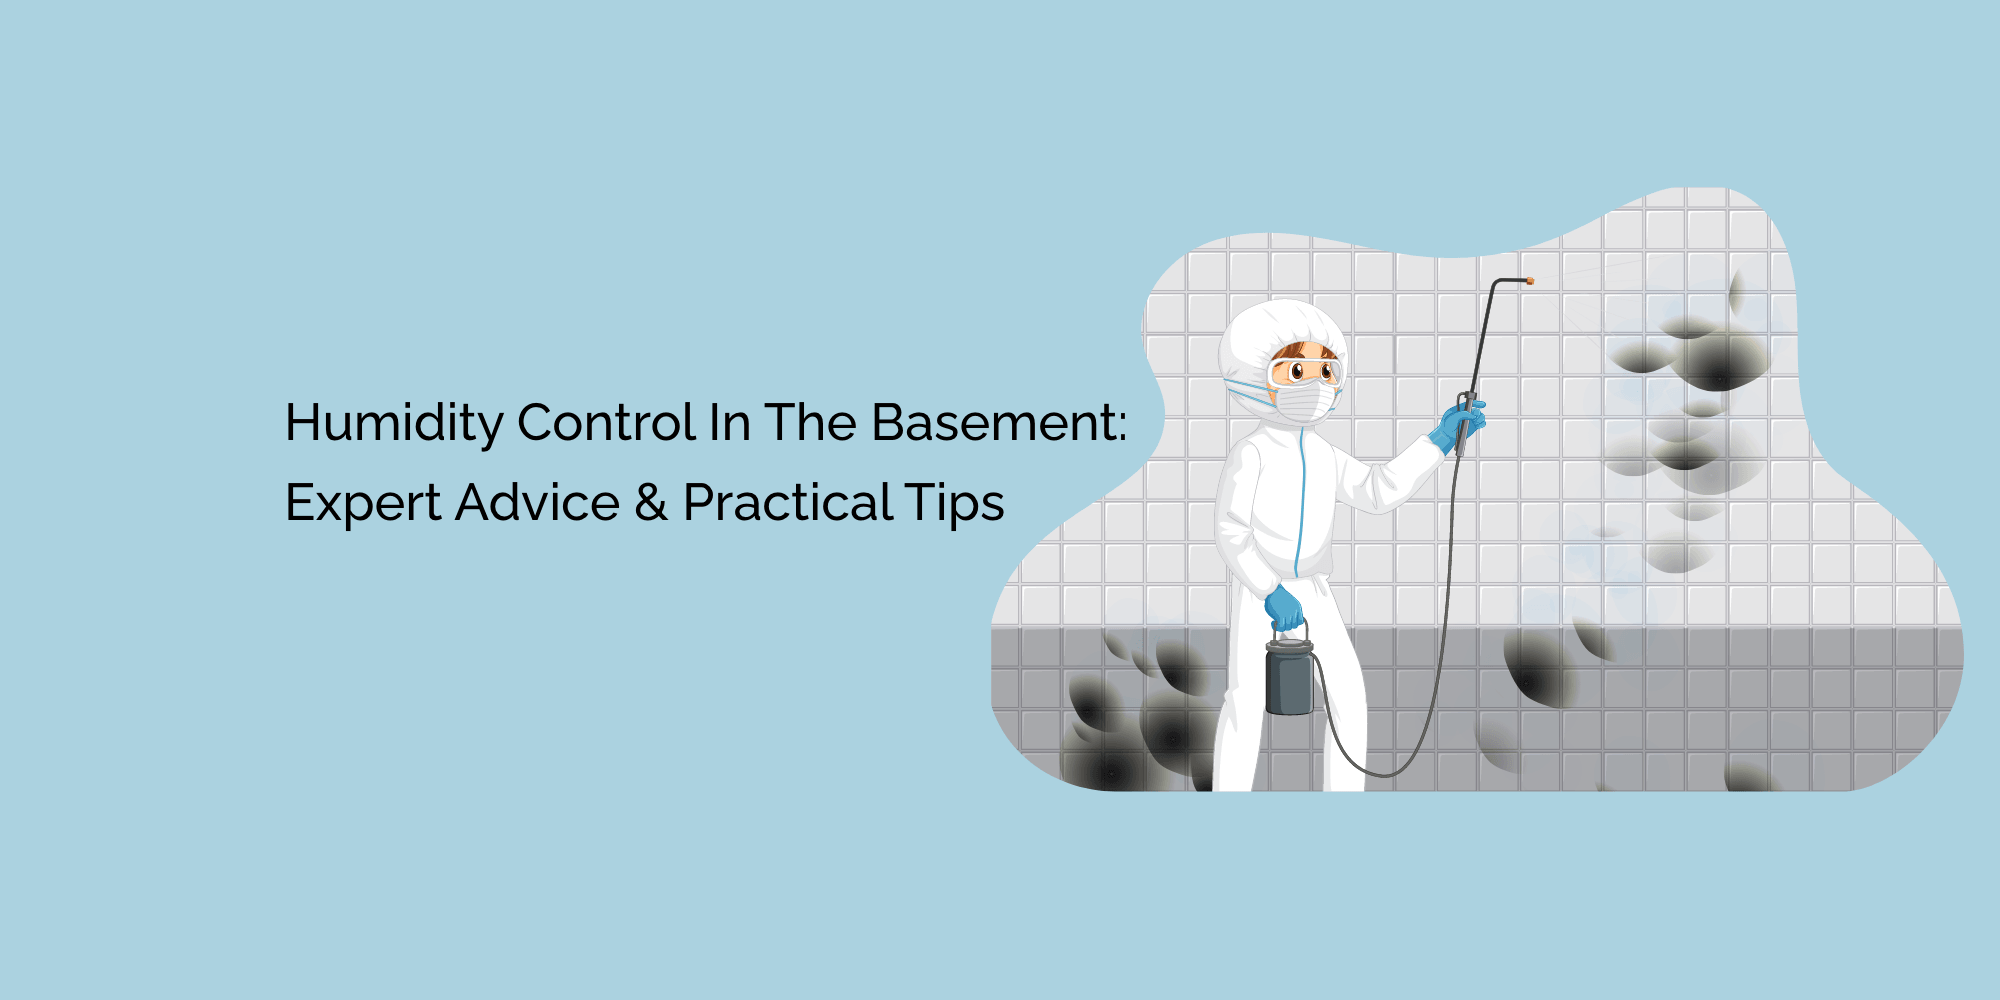 Humidity Control in the Basement: Expert Advice and Practical Tips